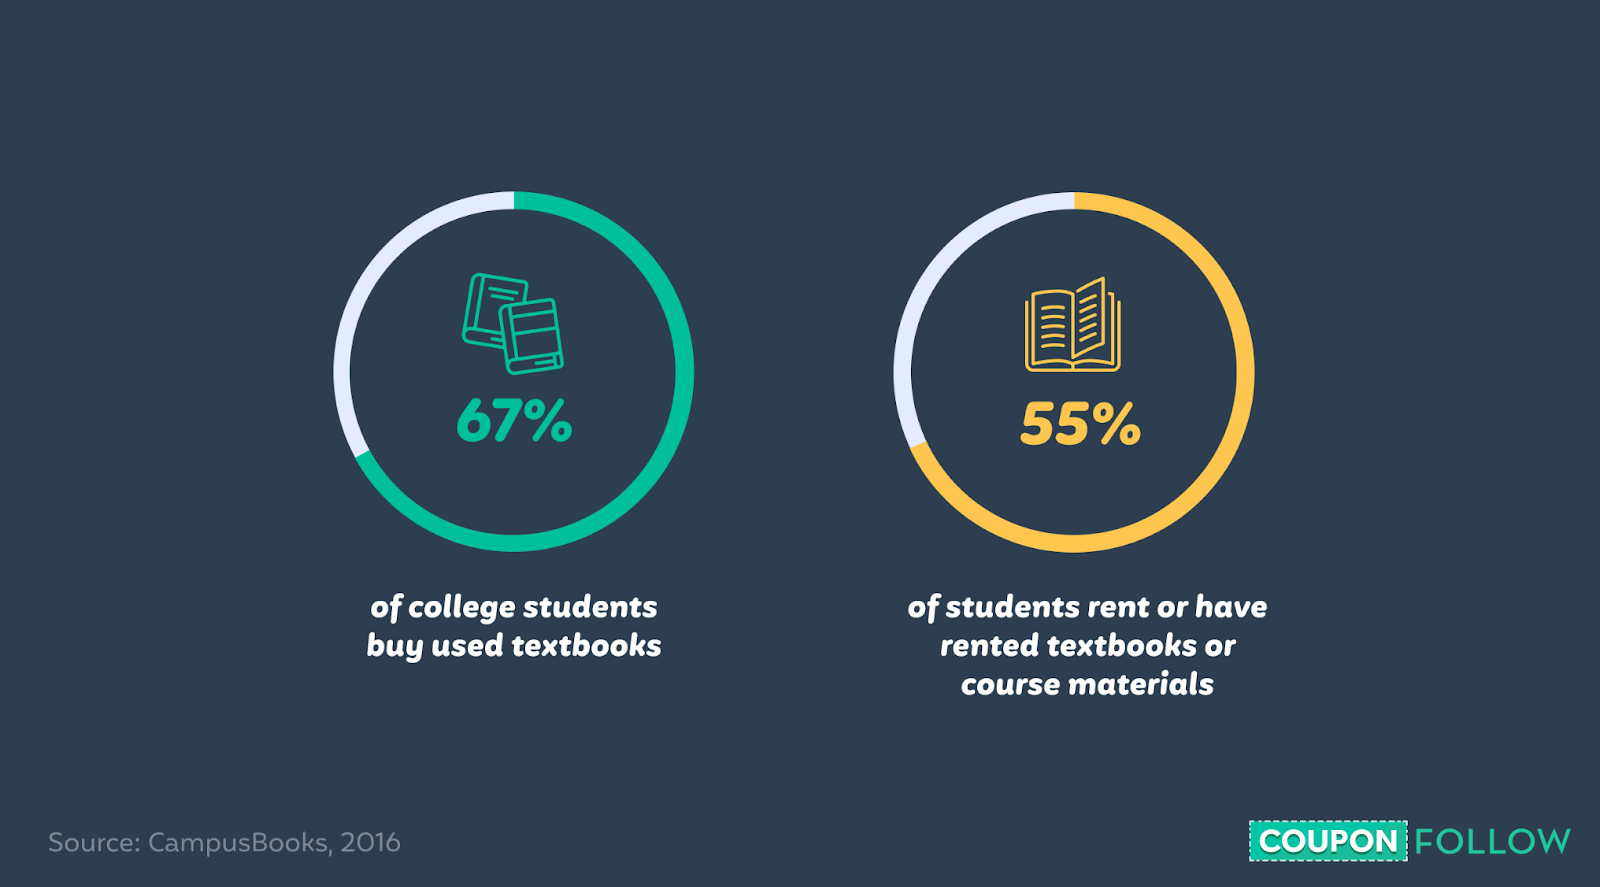 Percentage of students who rent and buy used textbooks